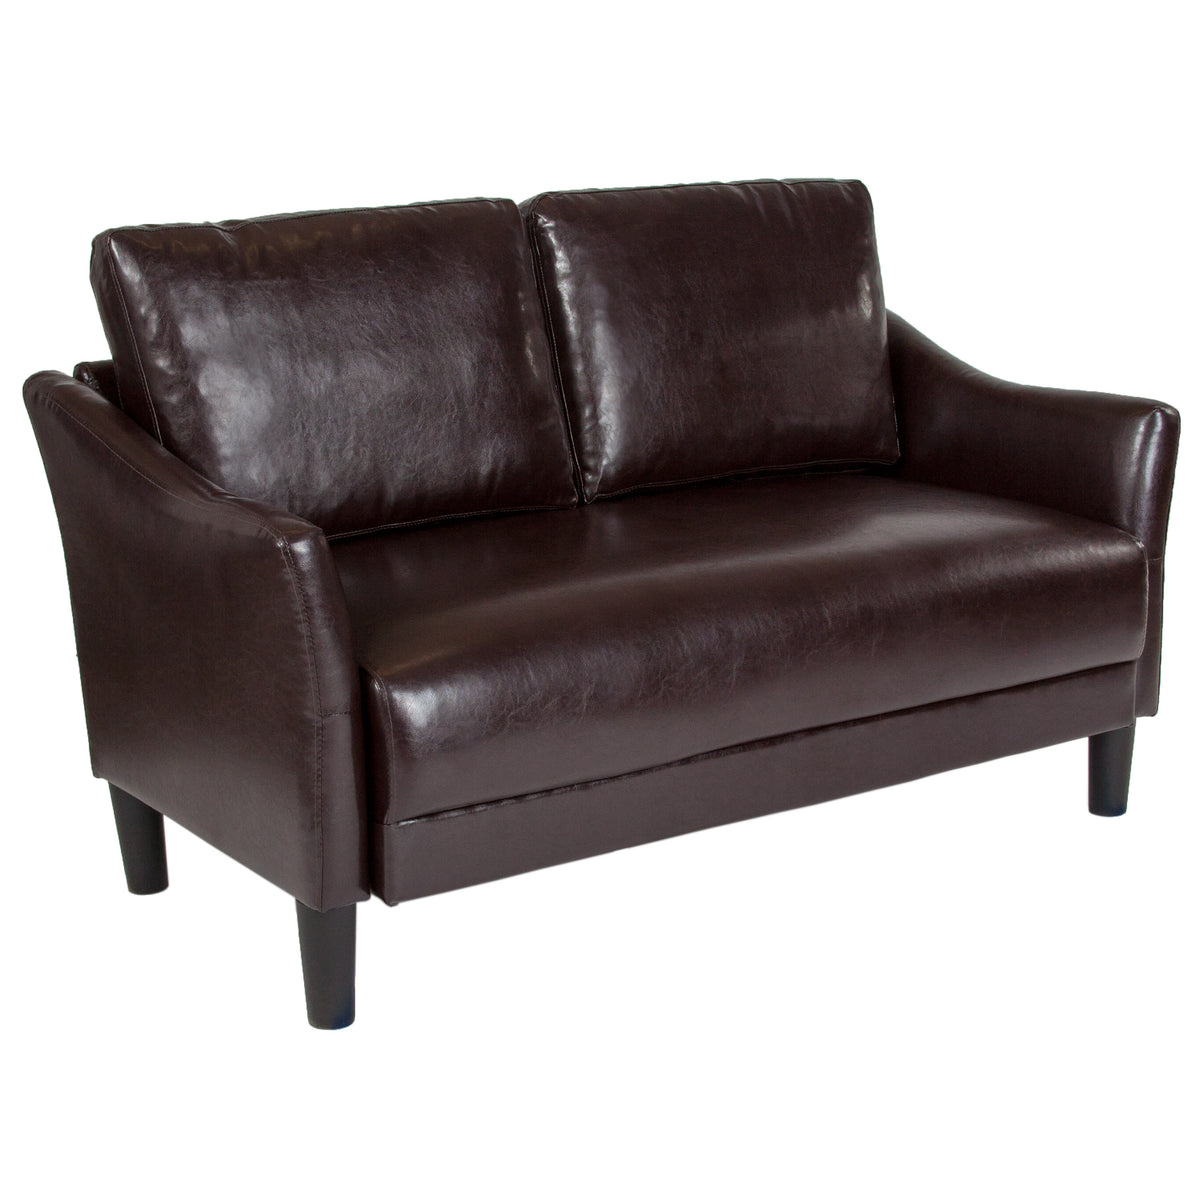 Brown LeatherSoft |#| Upholstered Living Room Loveseat with Single Cushion Seat in Brown LeatherSoft